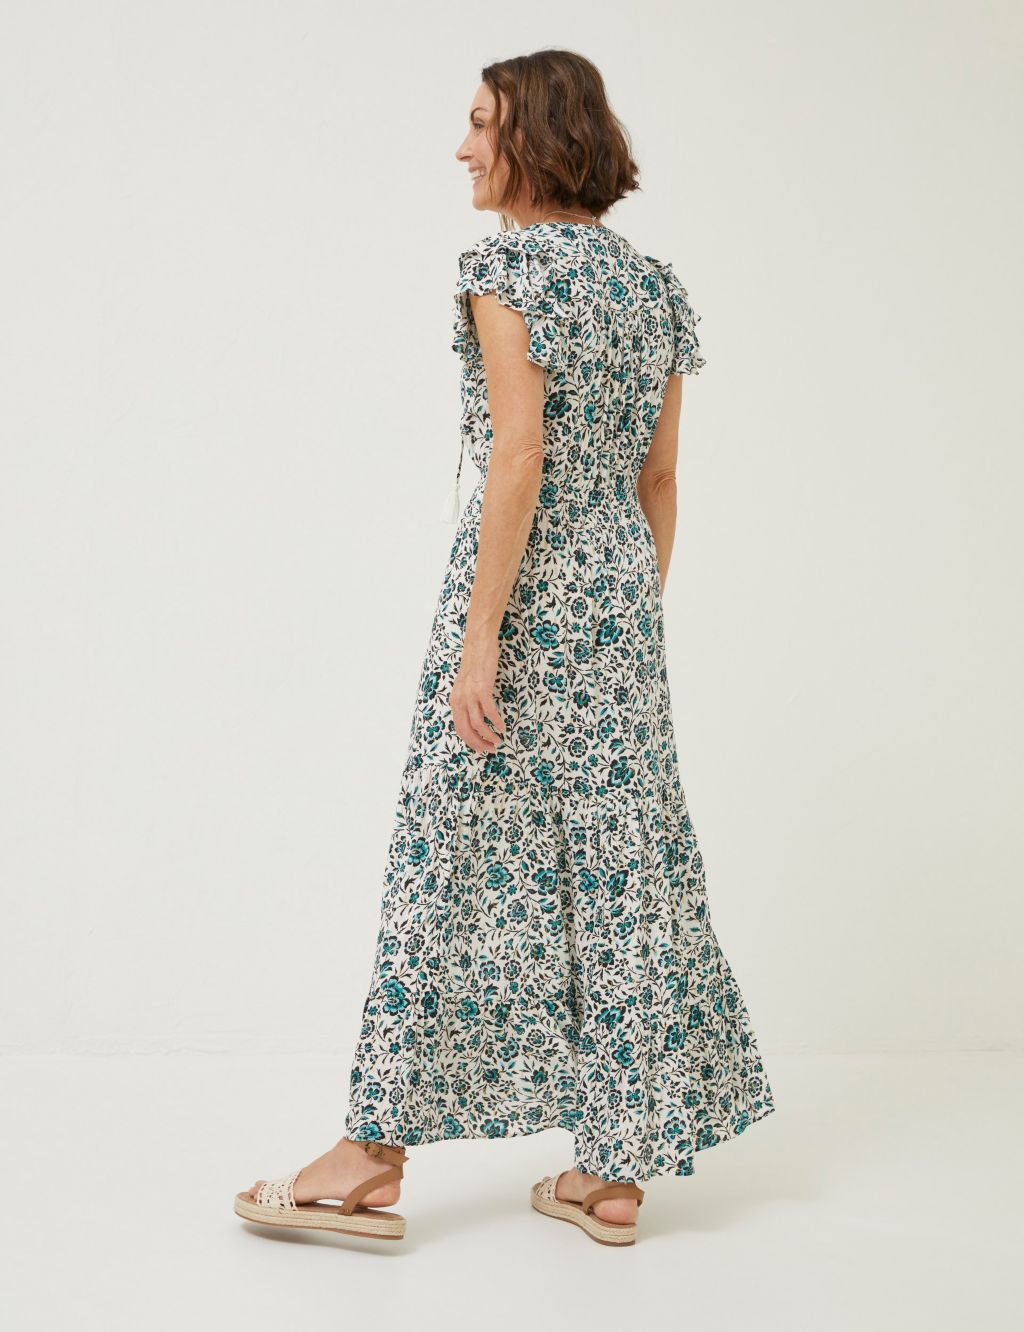 Floral Tie Neck Shirred Maxi Tiered Dress image 2